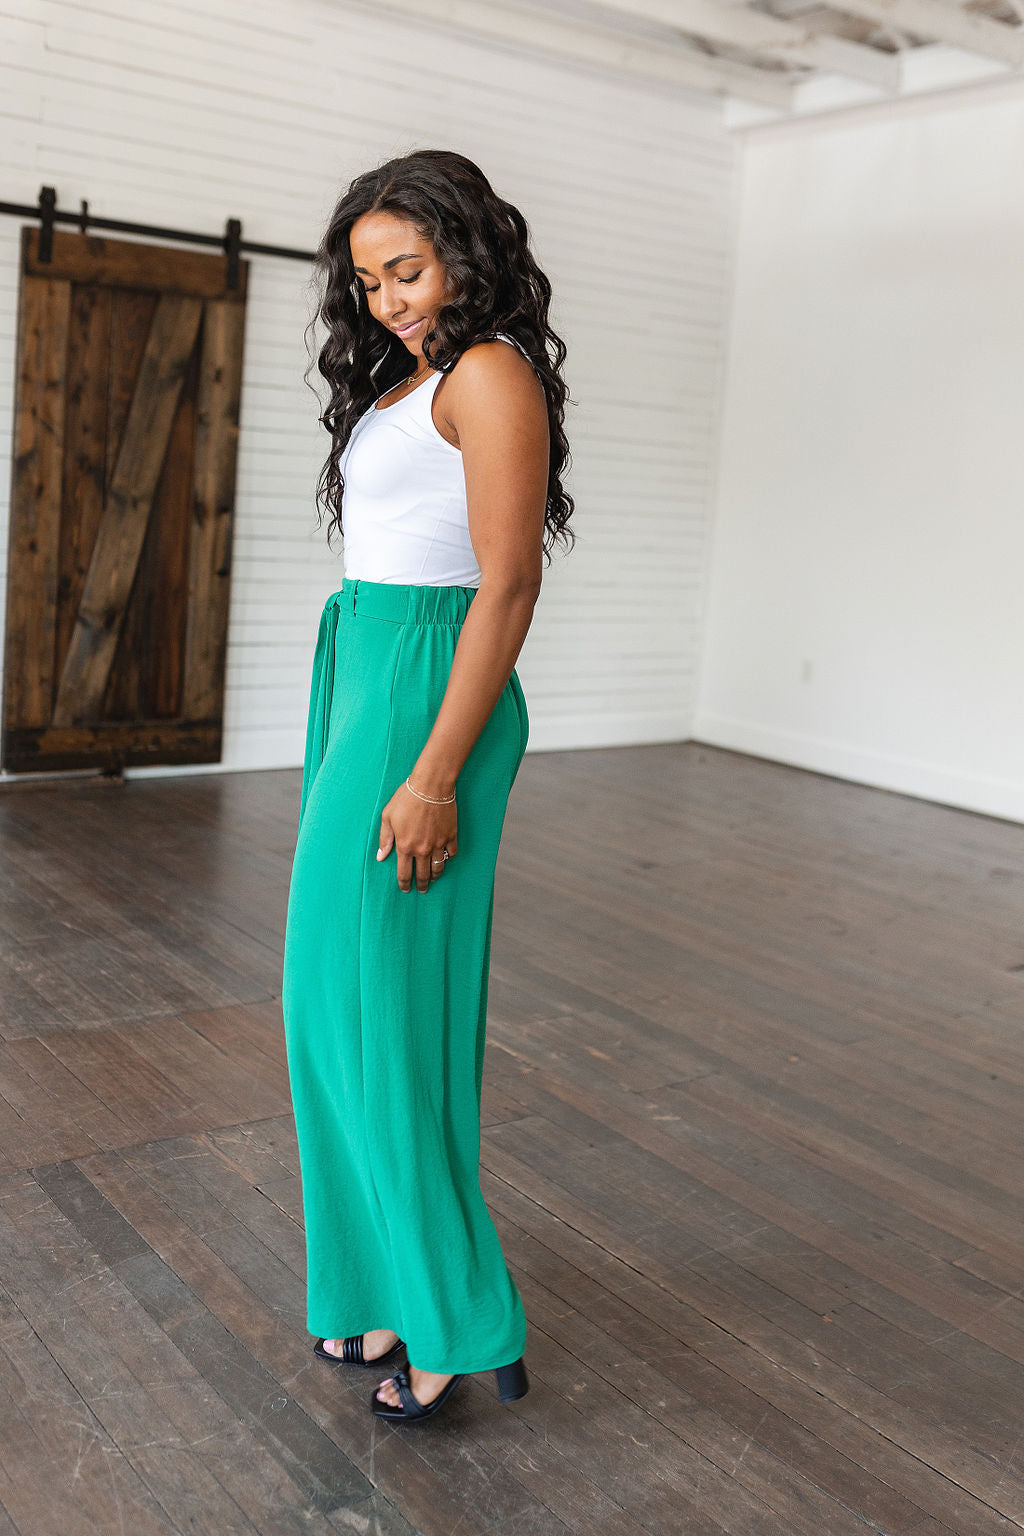 On The Other Side - Southern Divas Boutique